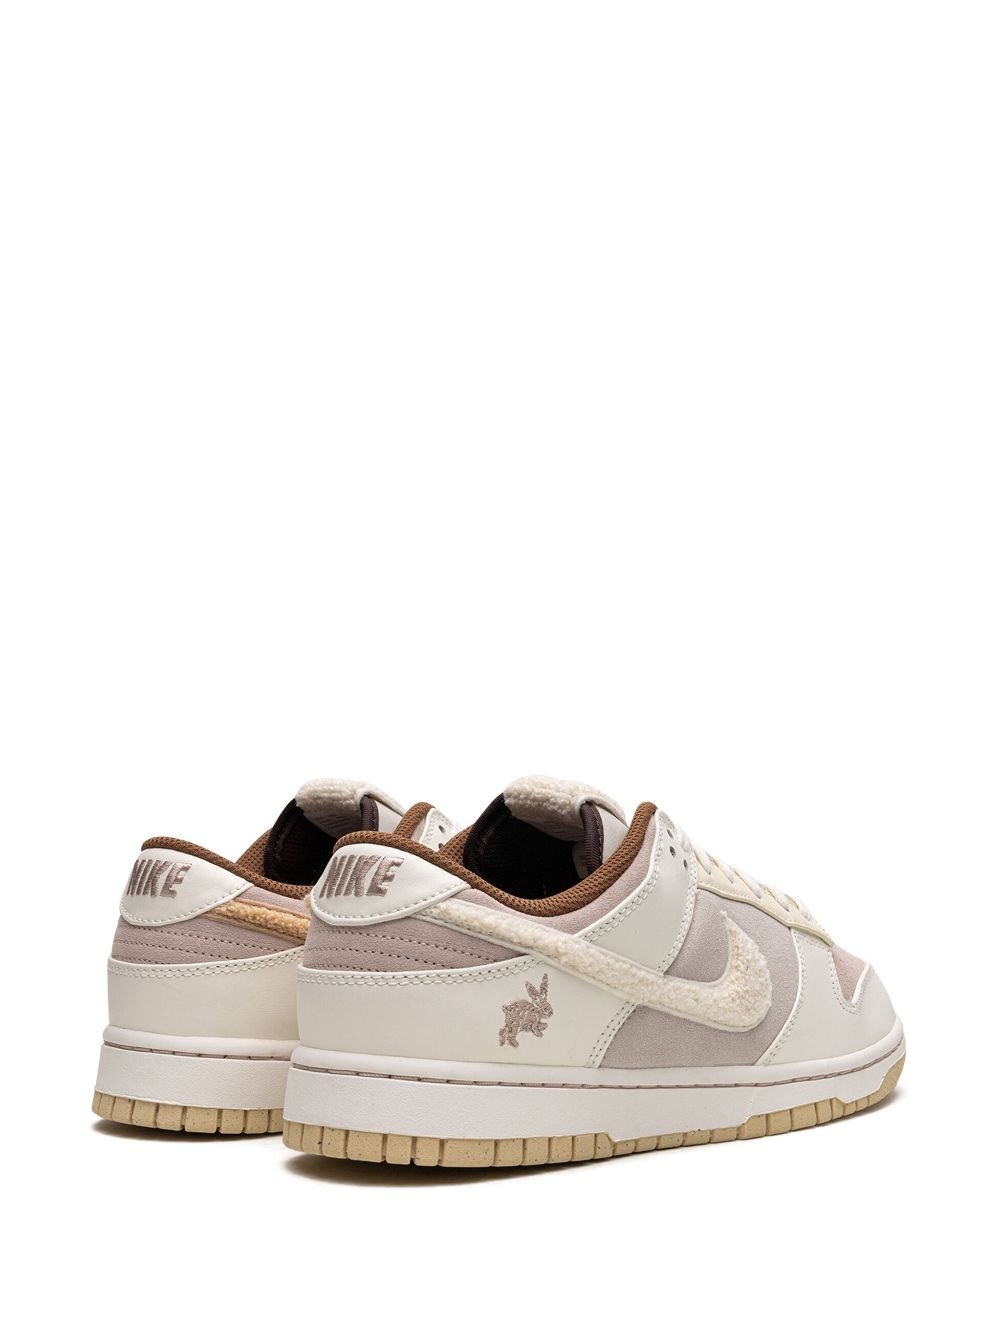 Dunk Low Retro PRM "Year Of The Rabbit" sneakers - 3